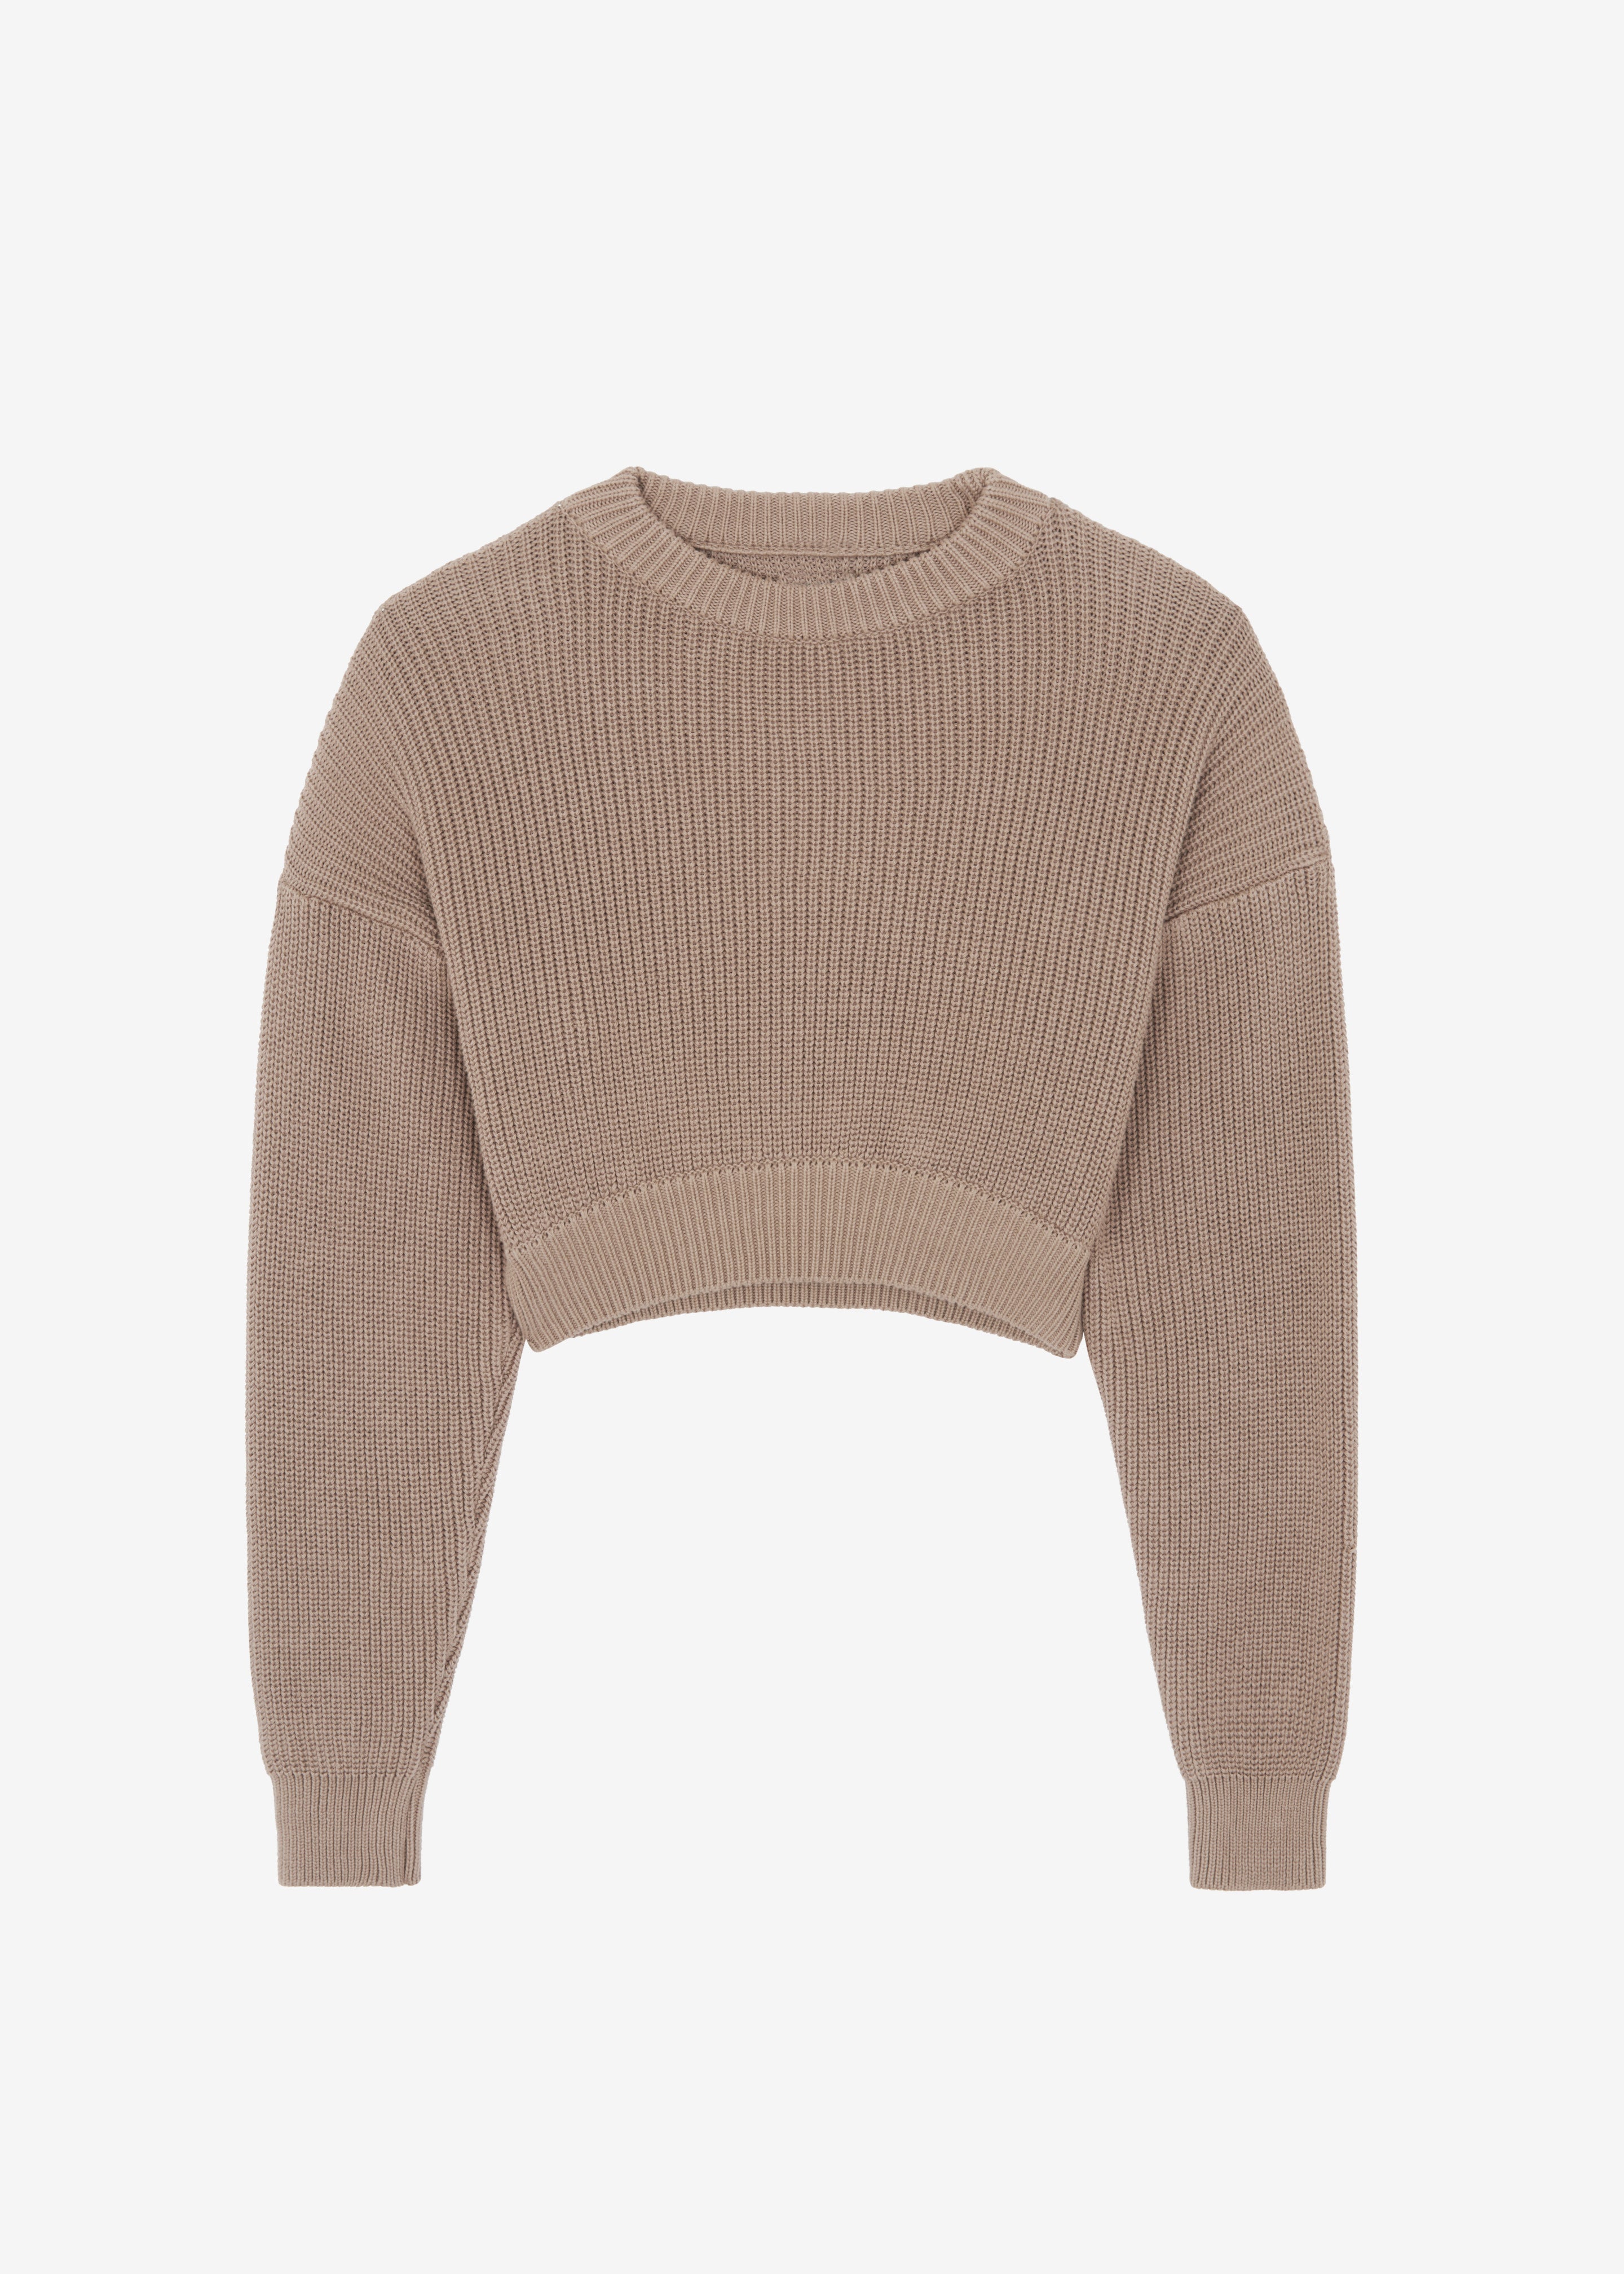 Teague Cropped Sweater - Beige - 8